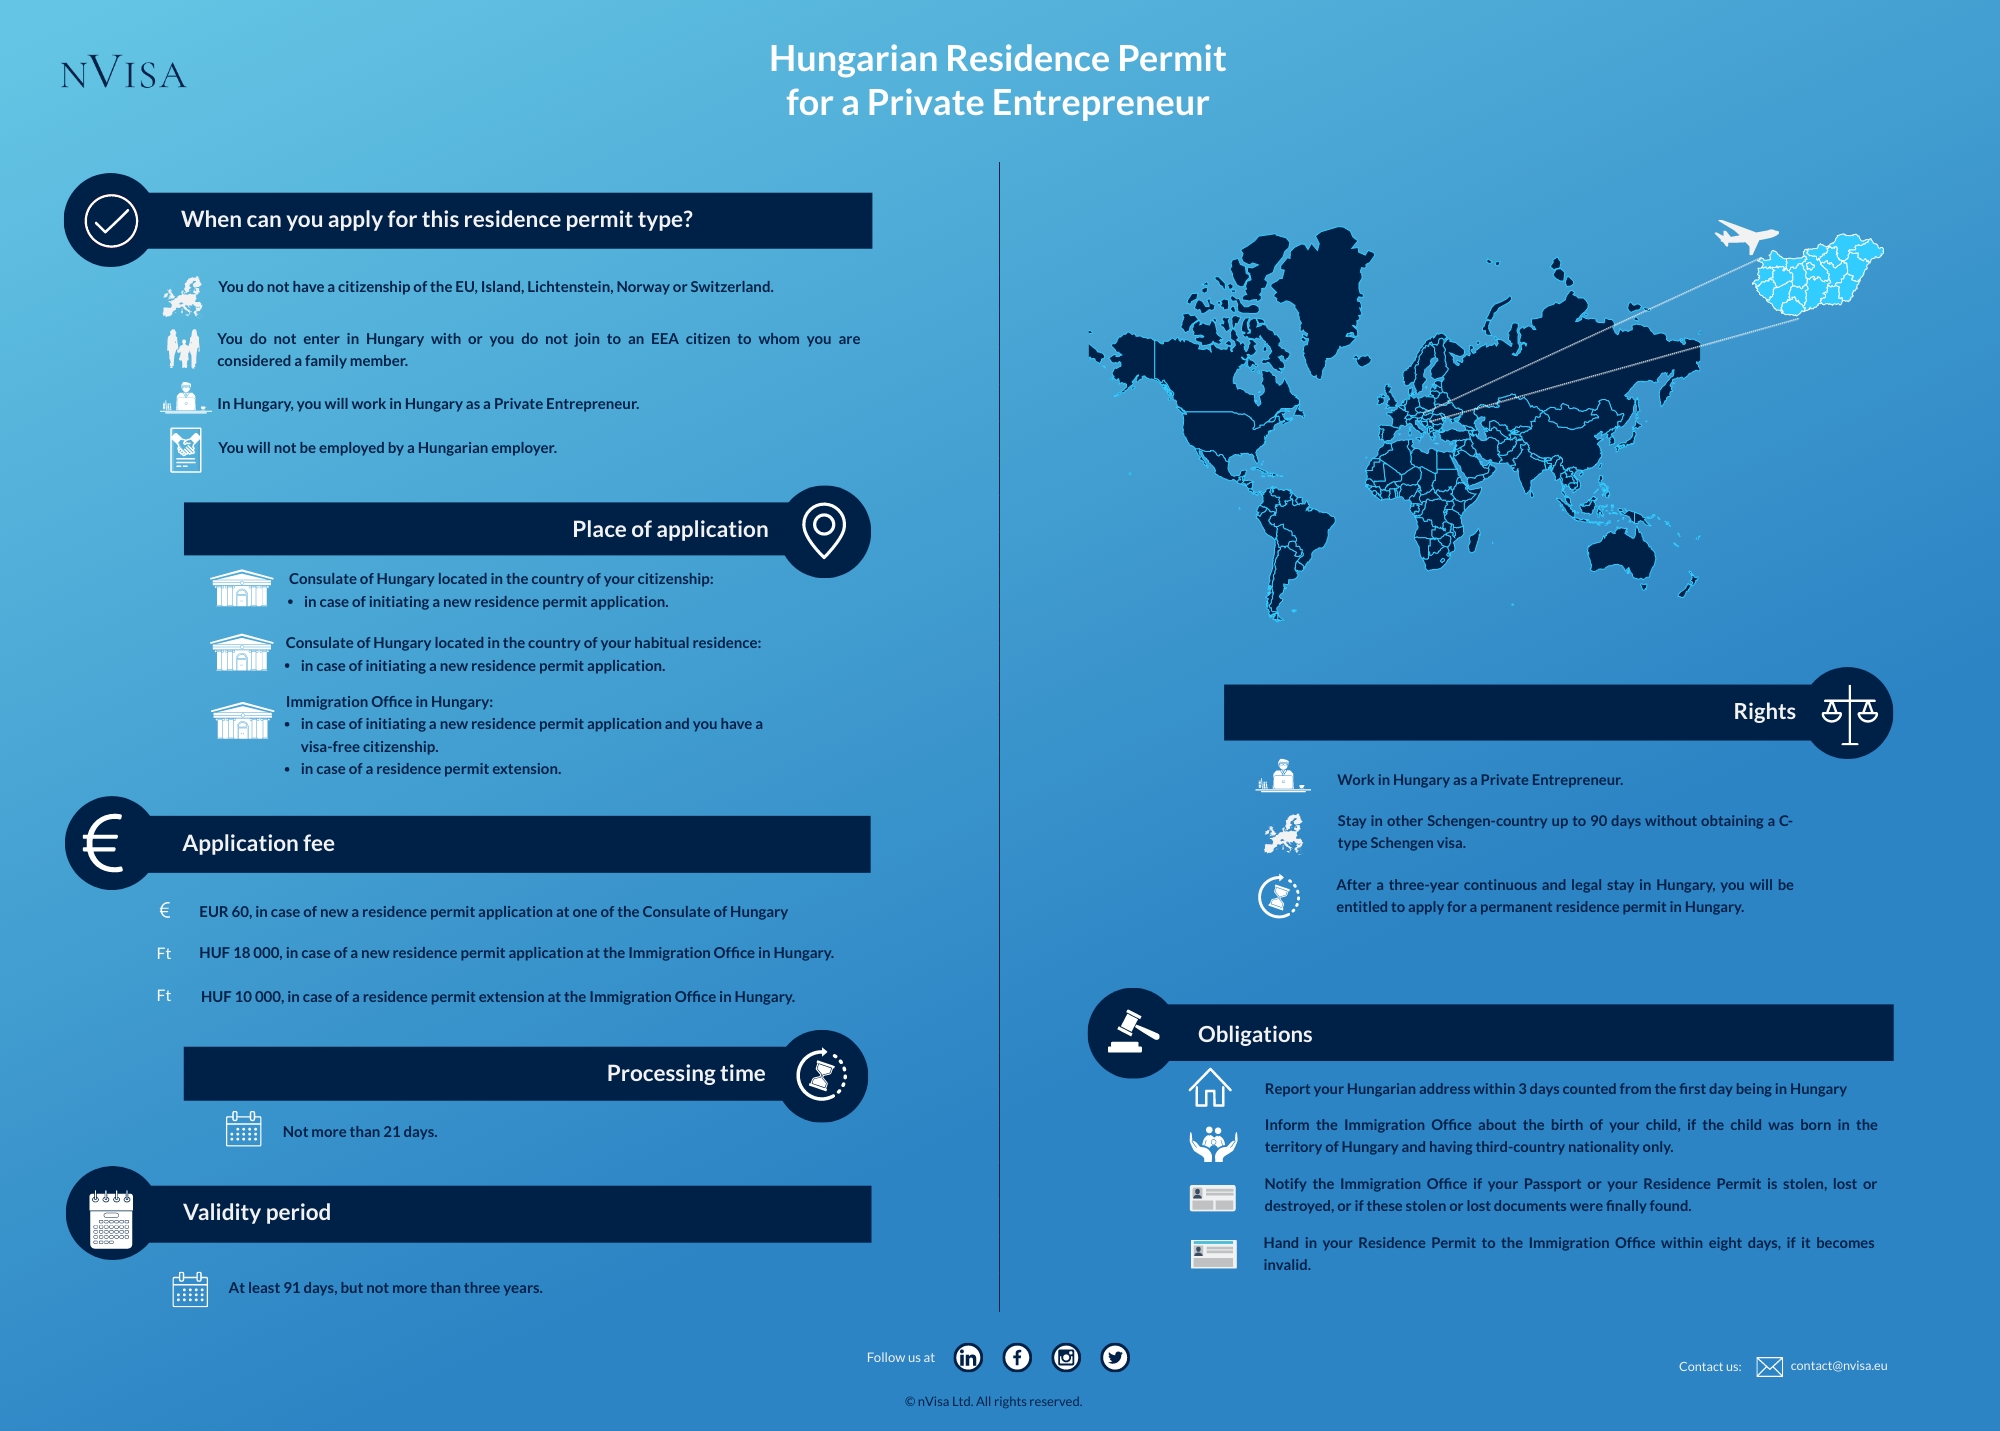 Infographic about immigration requirements and the details about obtaining a Residence Permit for the Pursuit of Gainful Activity in Hungary.